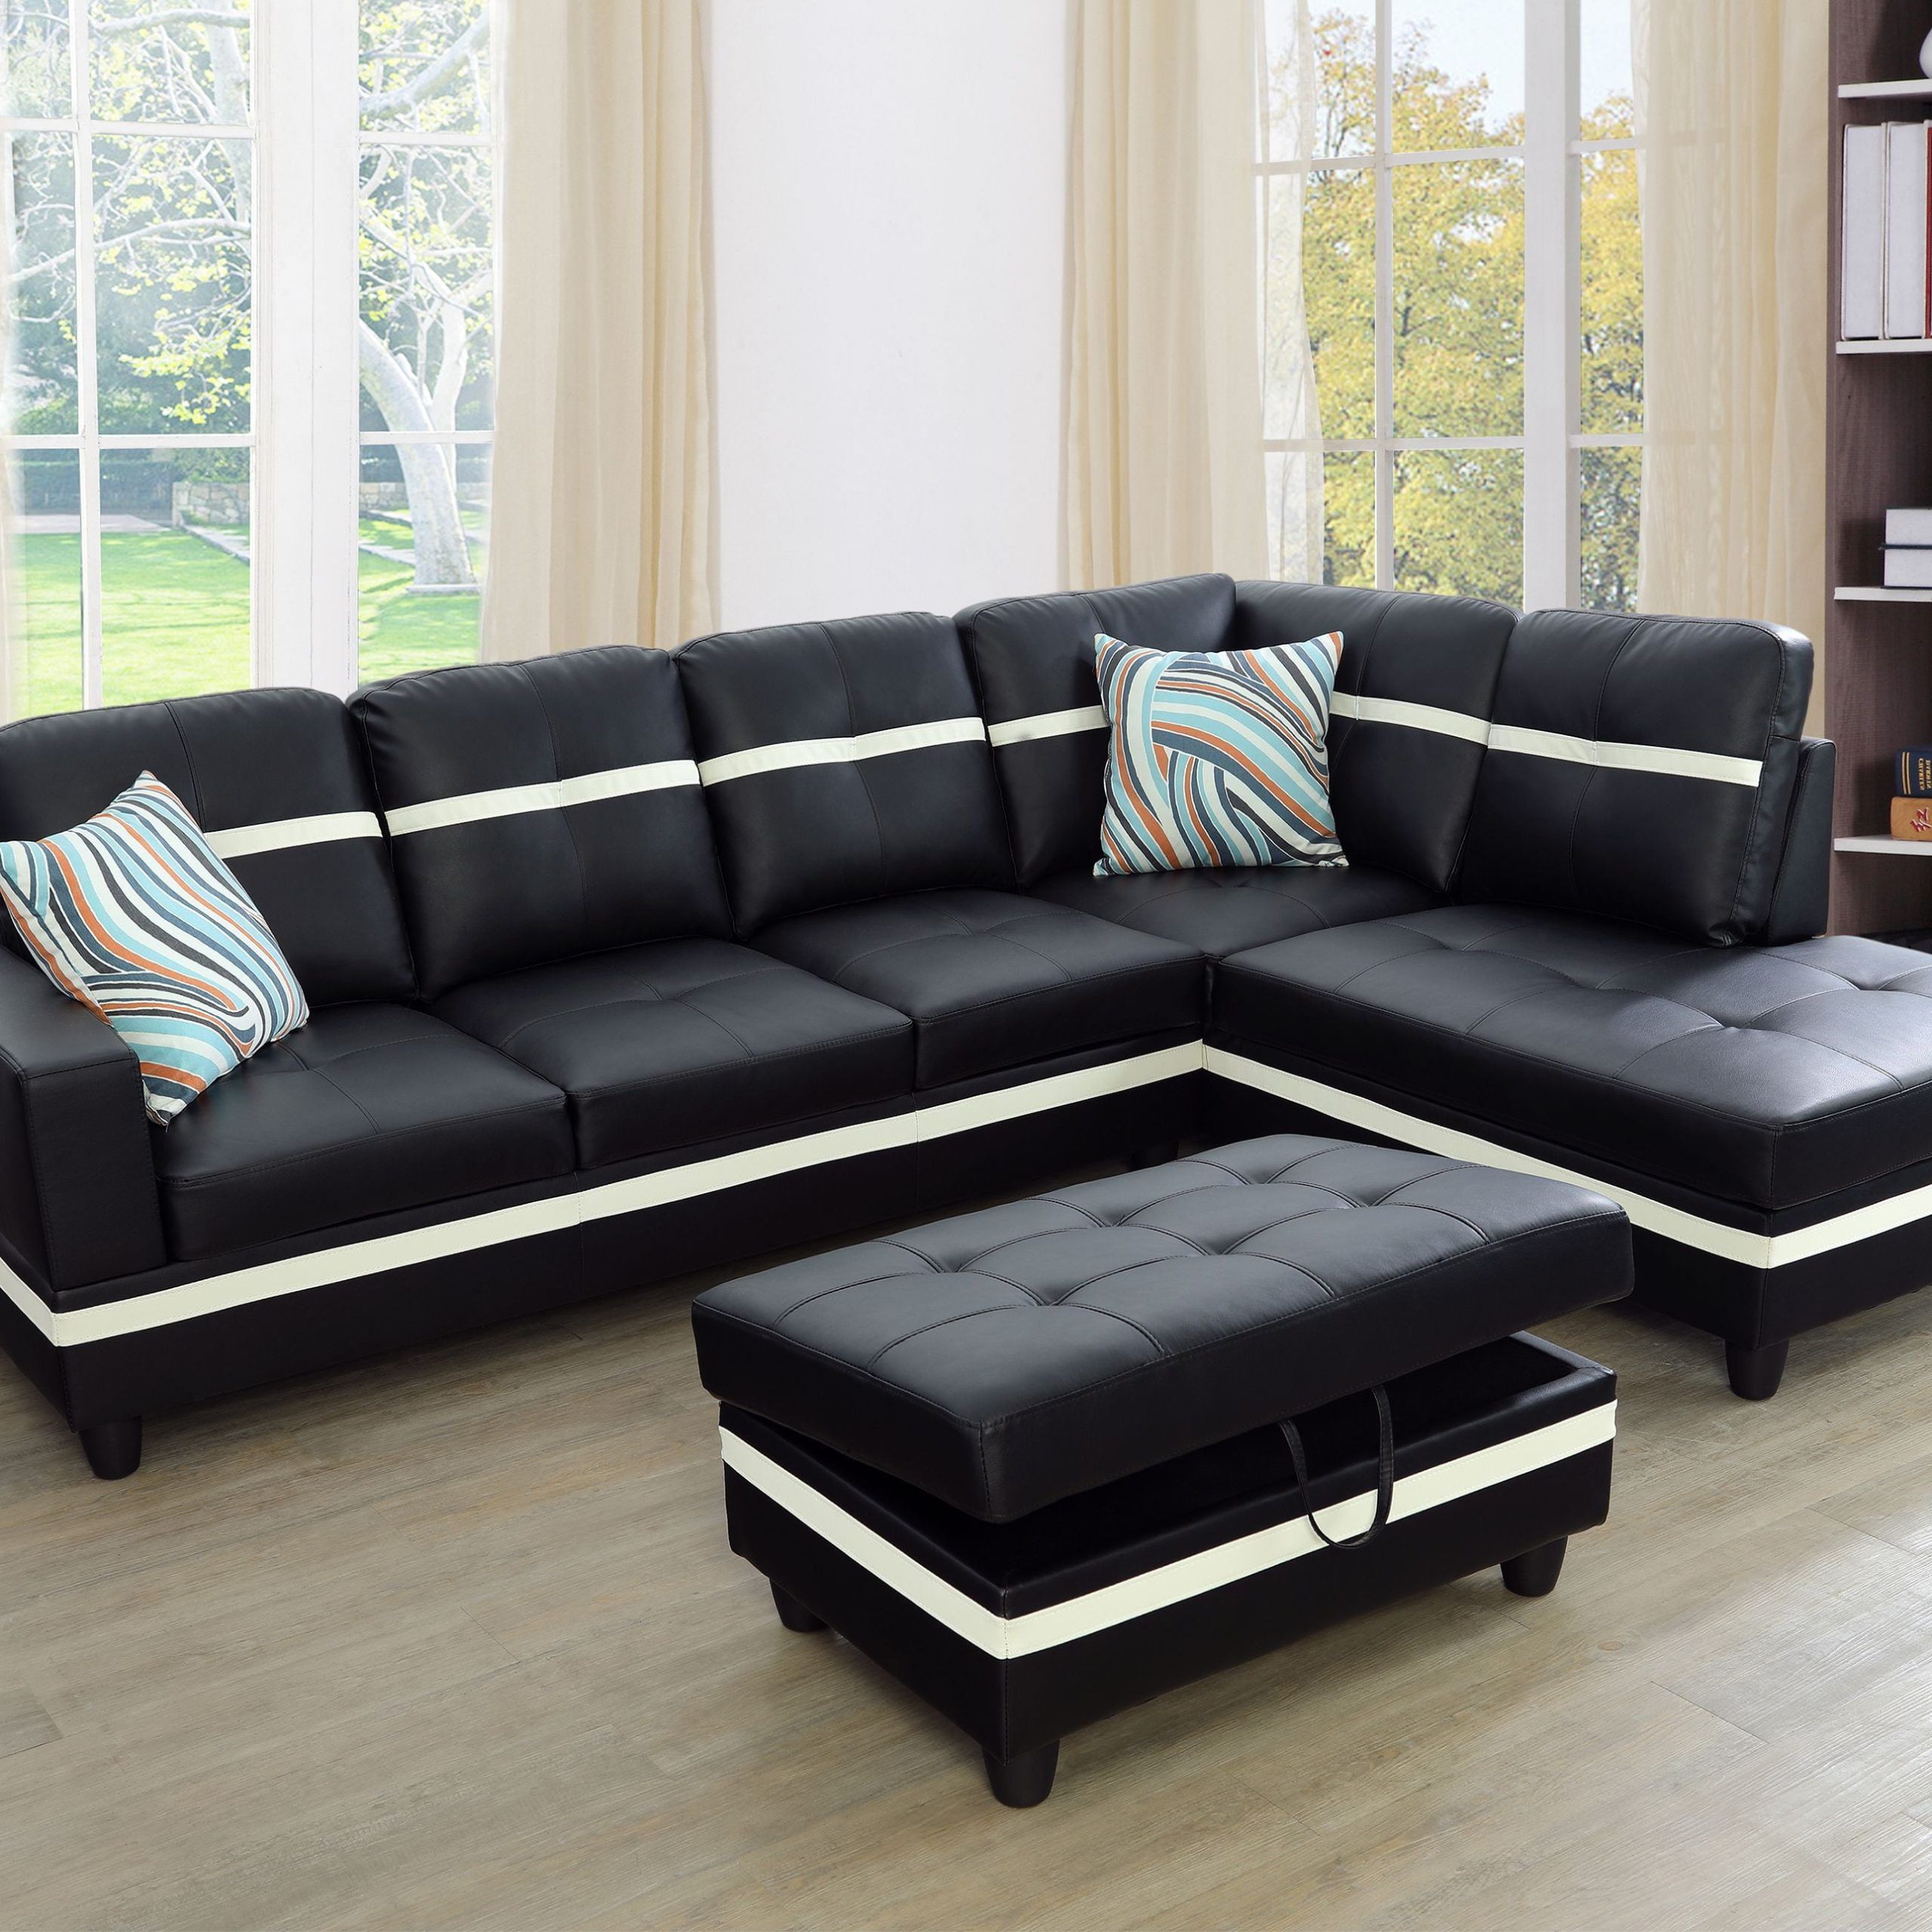 Aycp Furniture New Style  L Shape Sectional Sofa Set With Storage Inside Sofas With Ottomans (View 11 of 20)